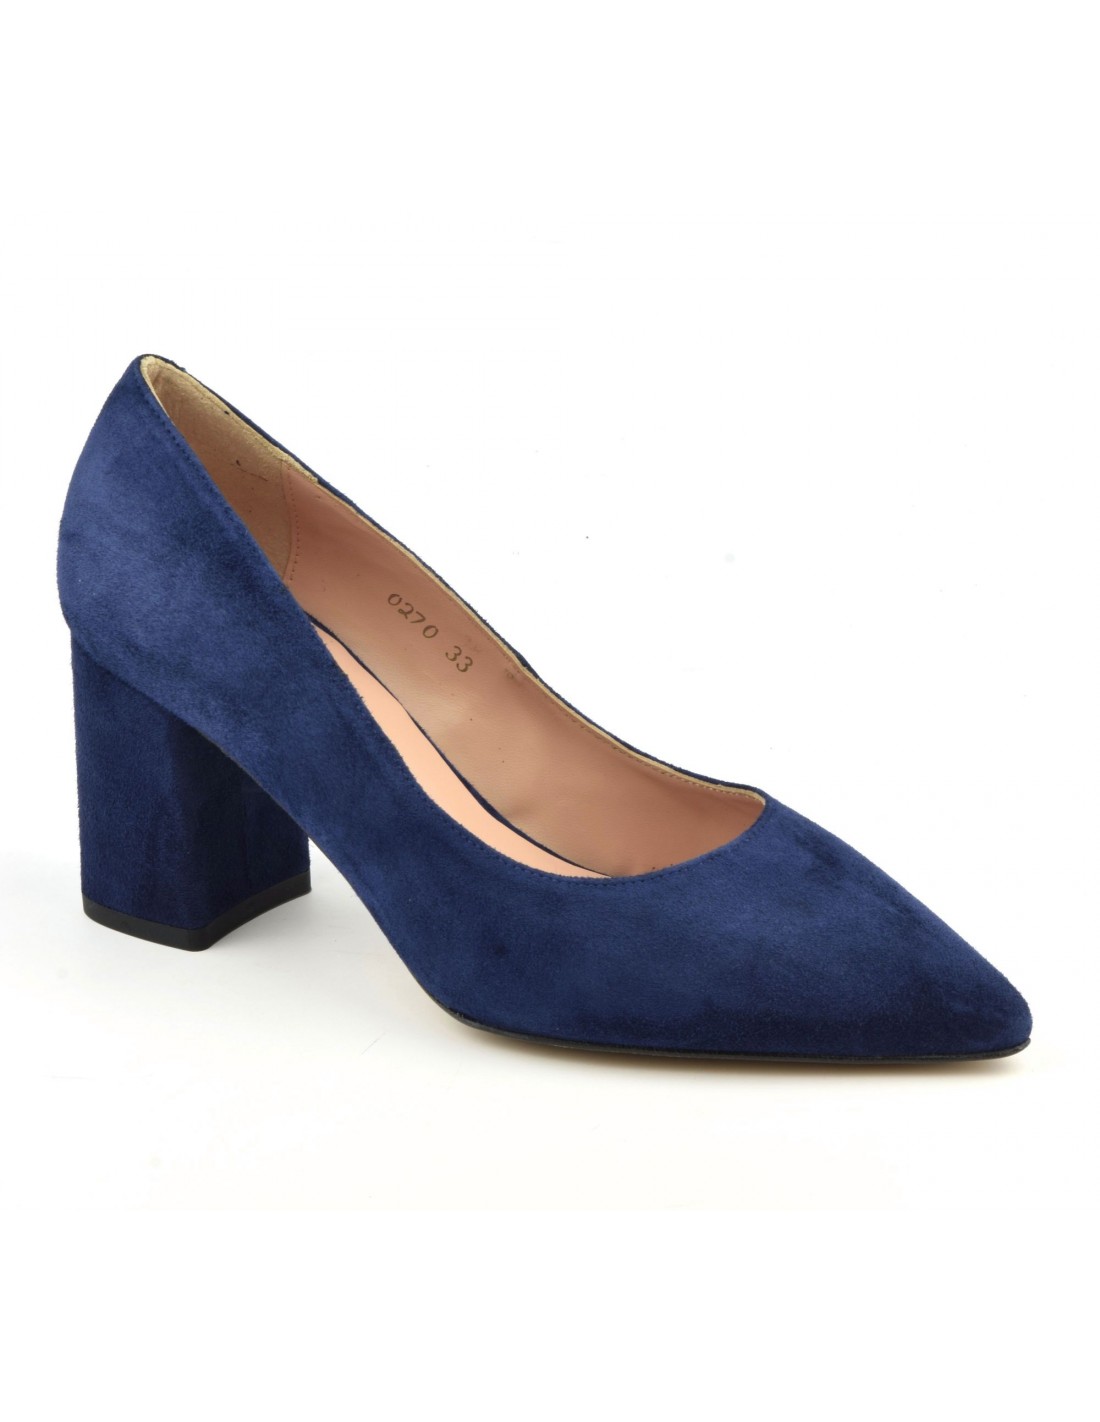 Pumps, pointed toes, suede leather 